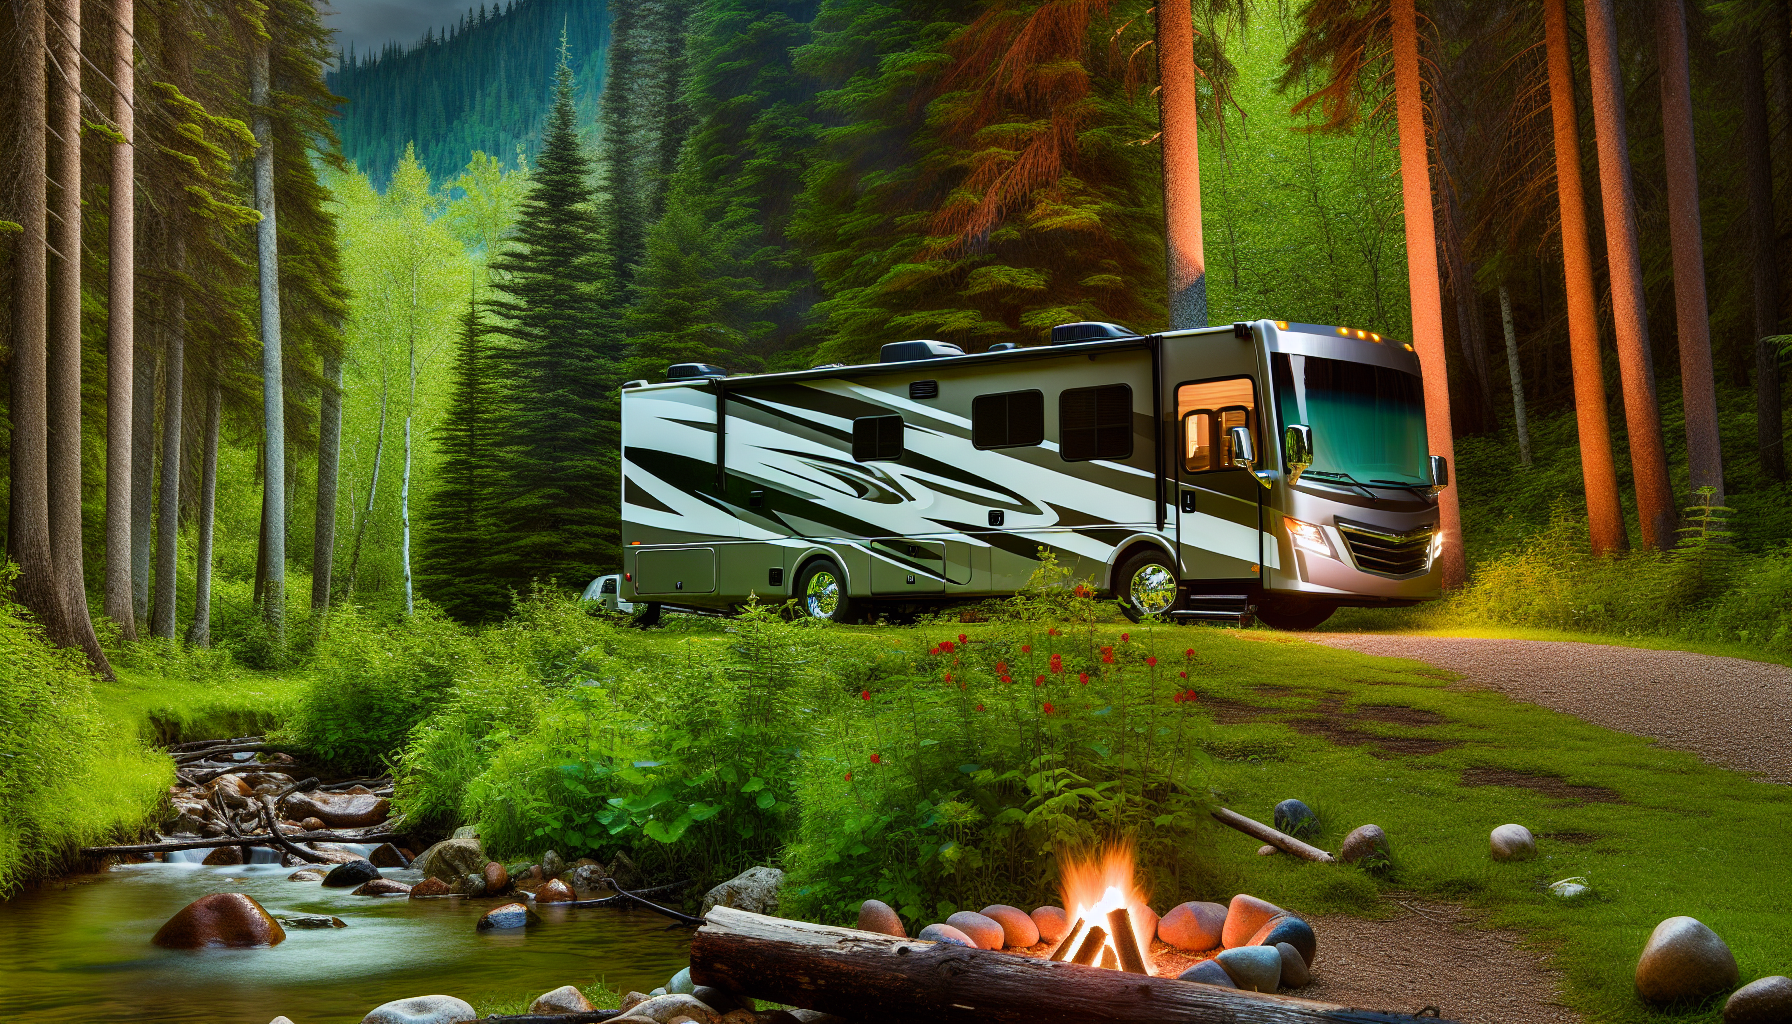 RV parked in a scenic camping spot